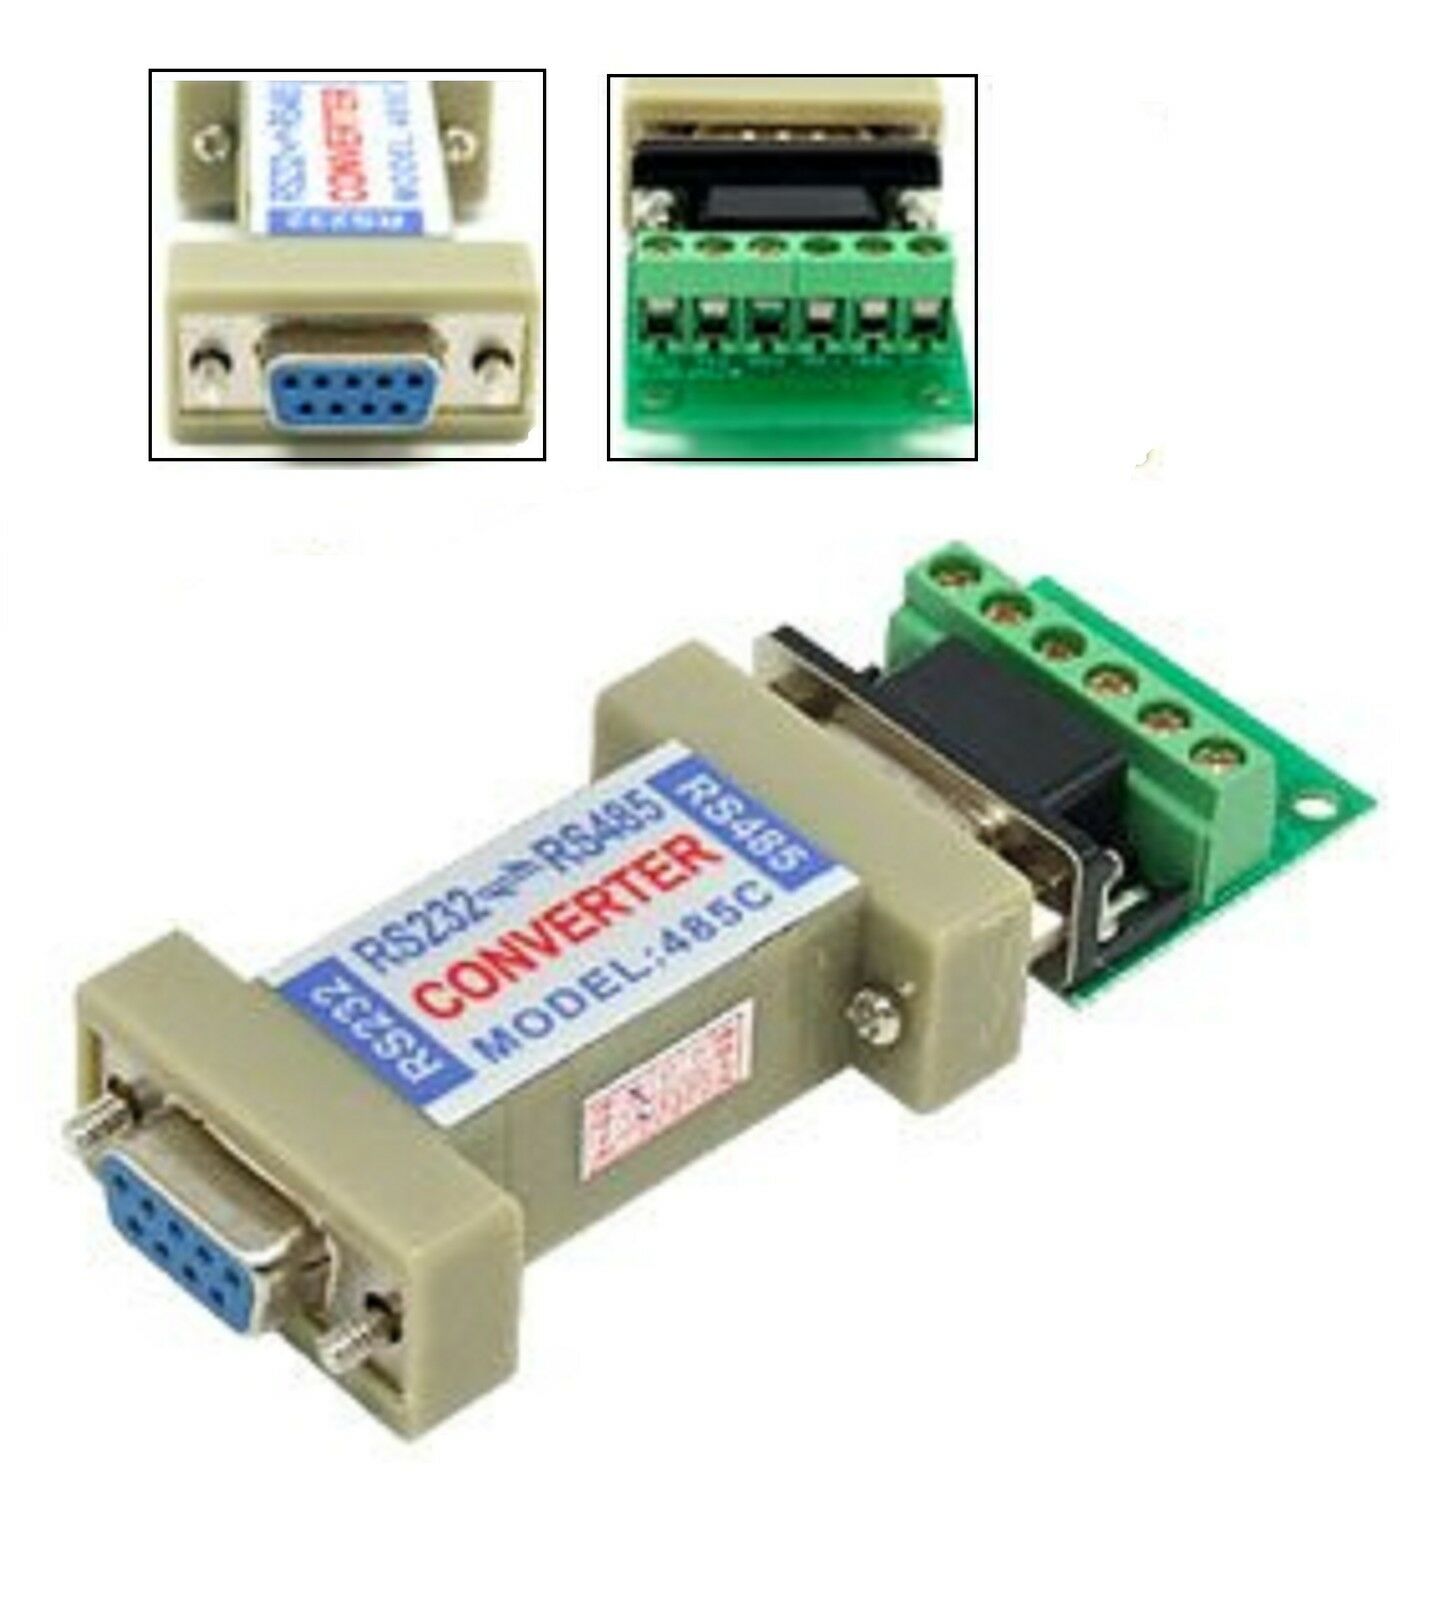 RS232 to RS485 Communication Data Converter Adapter with a Terminal Board